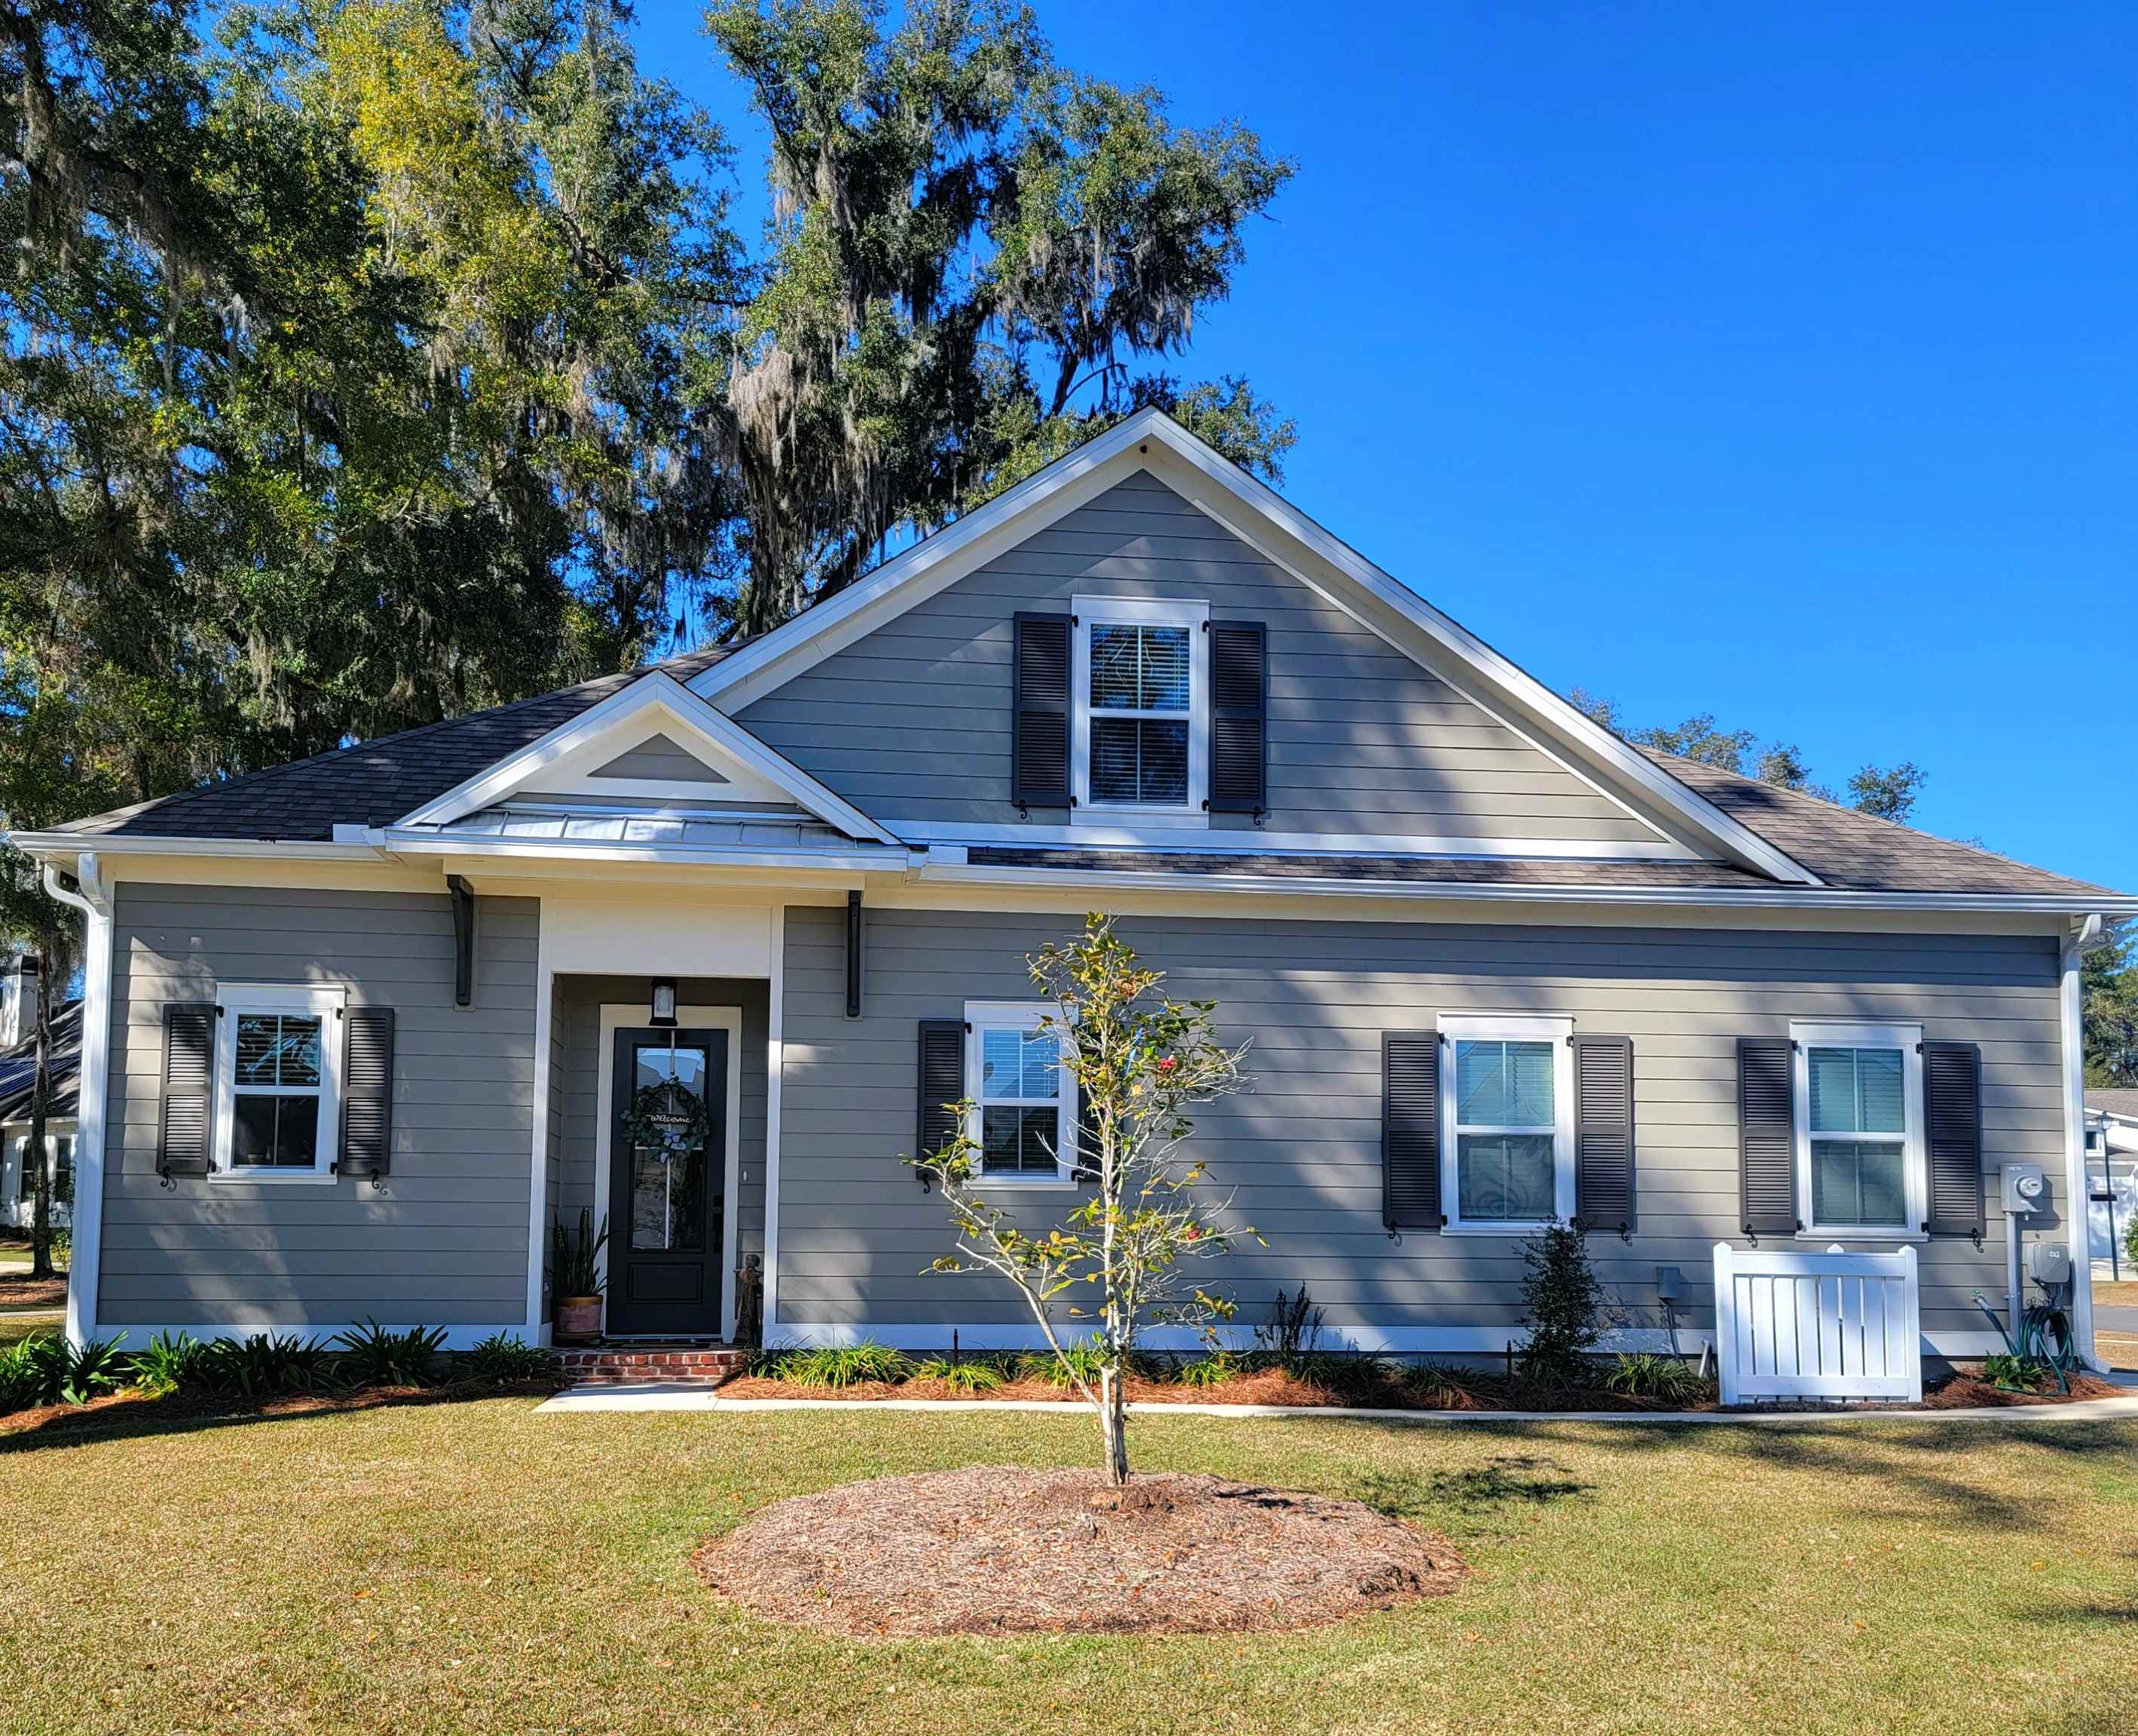 Beautiful almost New Construction in Tallahassee's only 55 plus Community. Screened in porch, gutters, blinds installed, extra shelving, larger lot, painted garage floor, fridge  w/ dual ice makers, and so much more. Come enjoy the quiet life with friends. The community features includes: pool, club house, get togethers, pickle ball, golf cart living, beautiful sunsets by the fire pit & lake. The community is also just minuets away from Costco, Walmart, Bass Pro shop, Publix, & many restaurants.